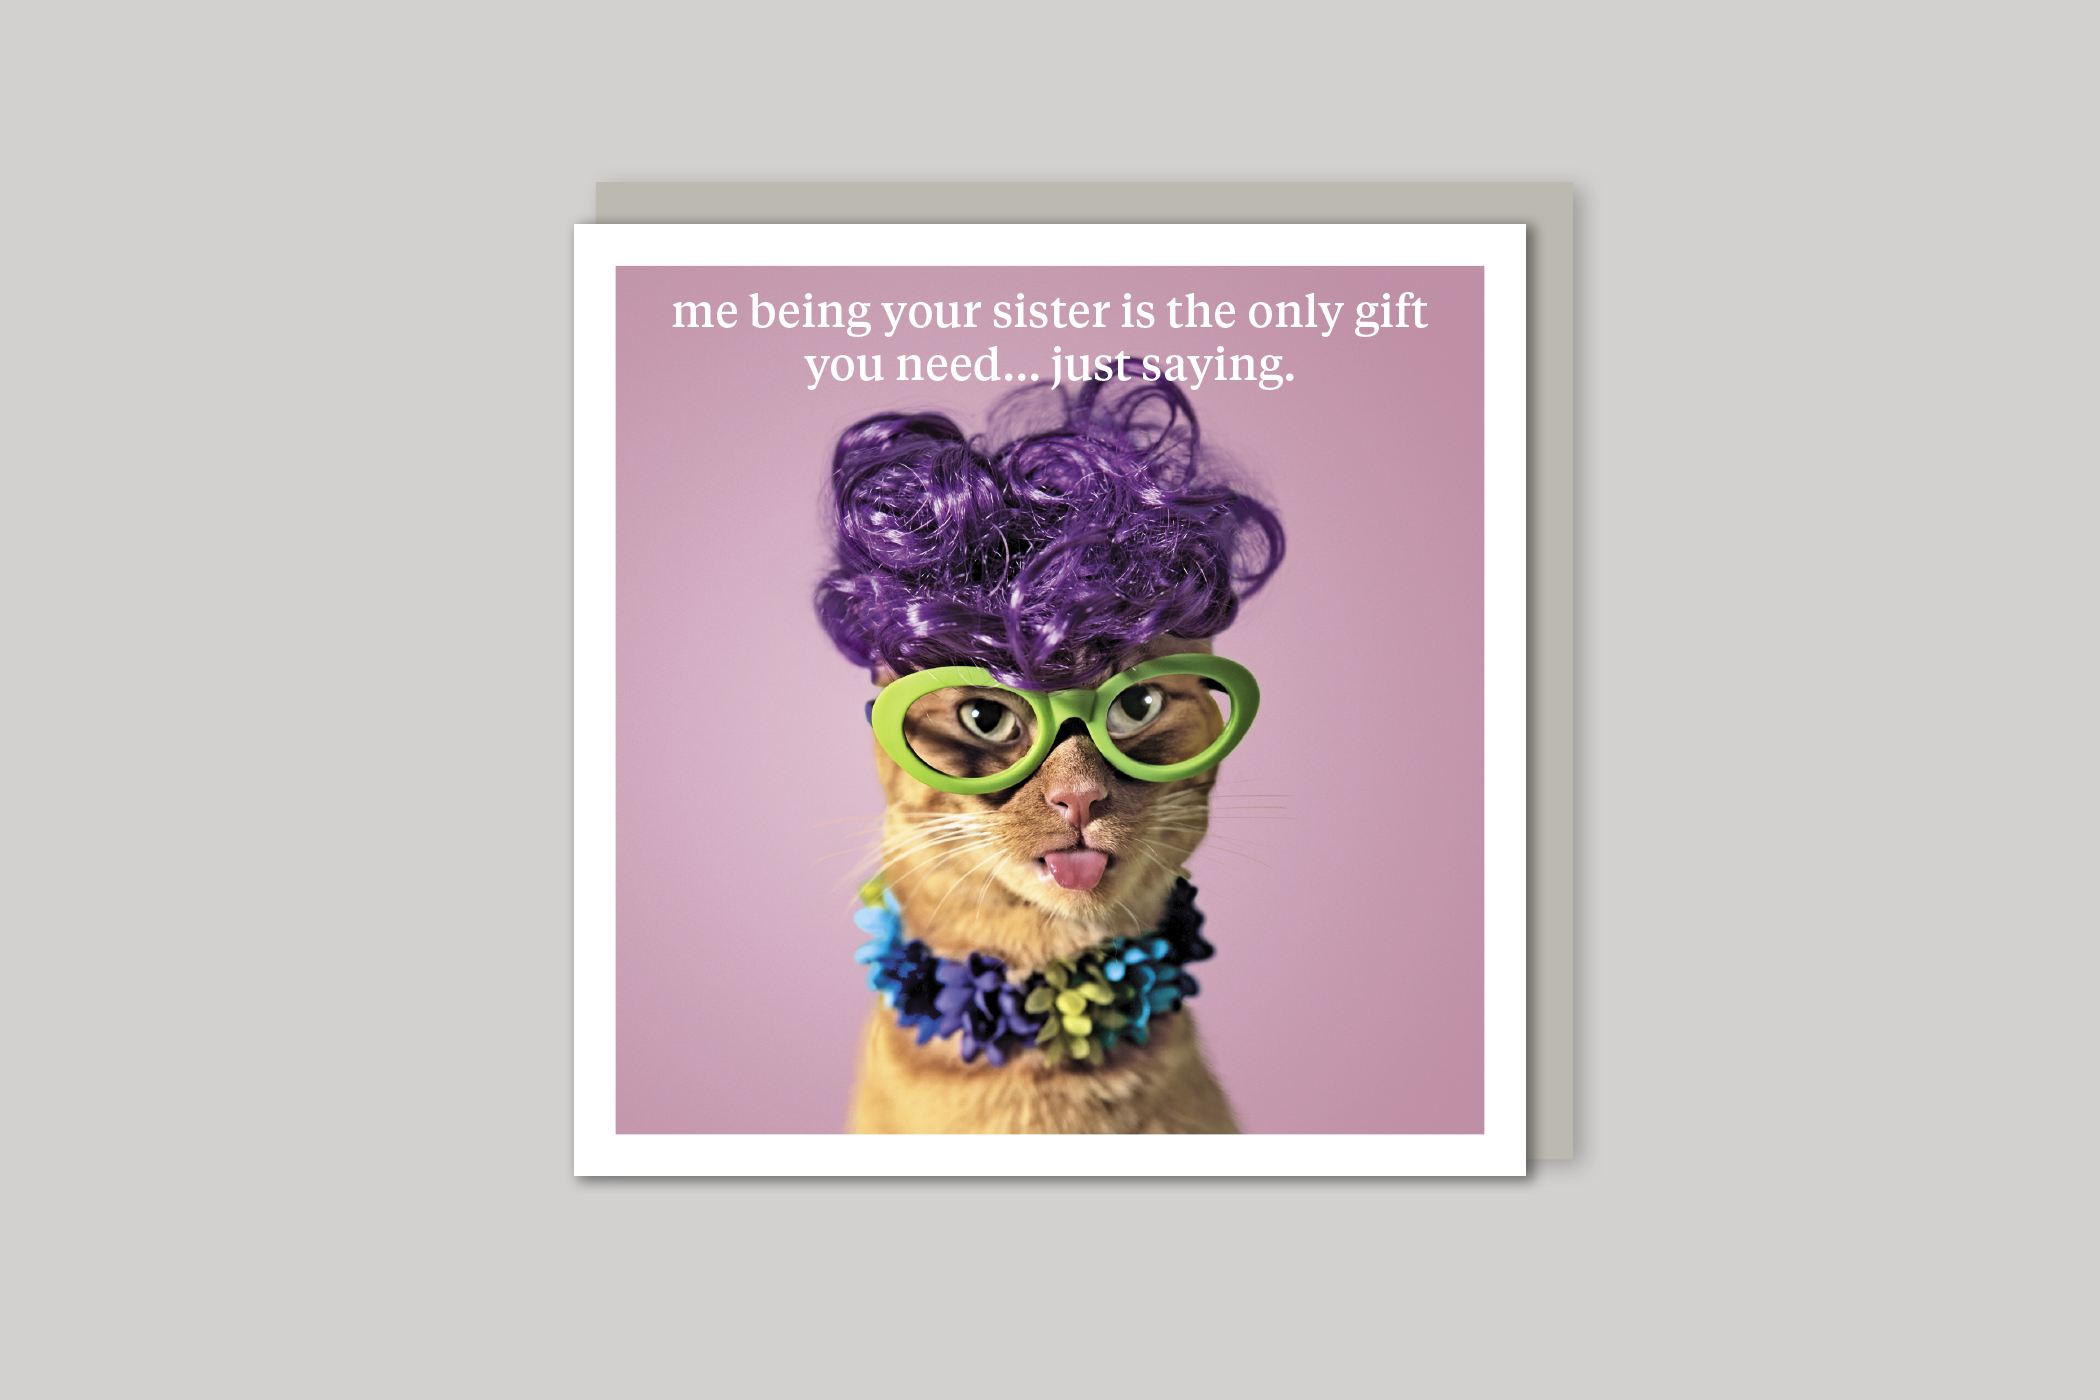 Just Saying sister card quirky animal portrait from Curious World range of greeting cards by Icon, back page.